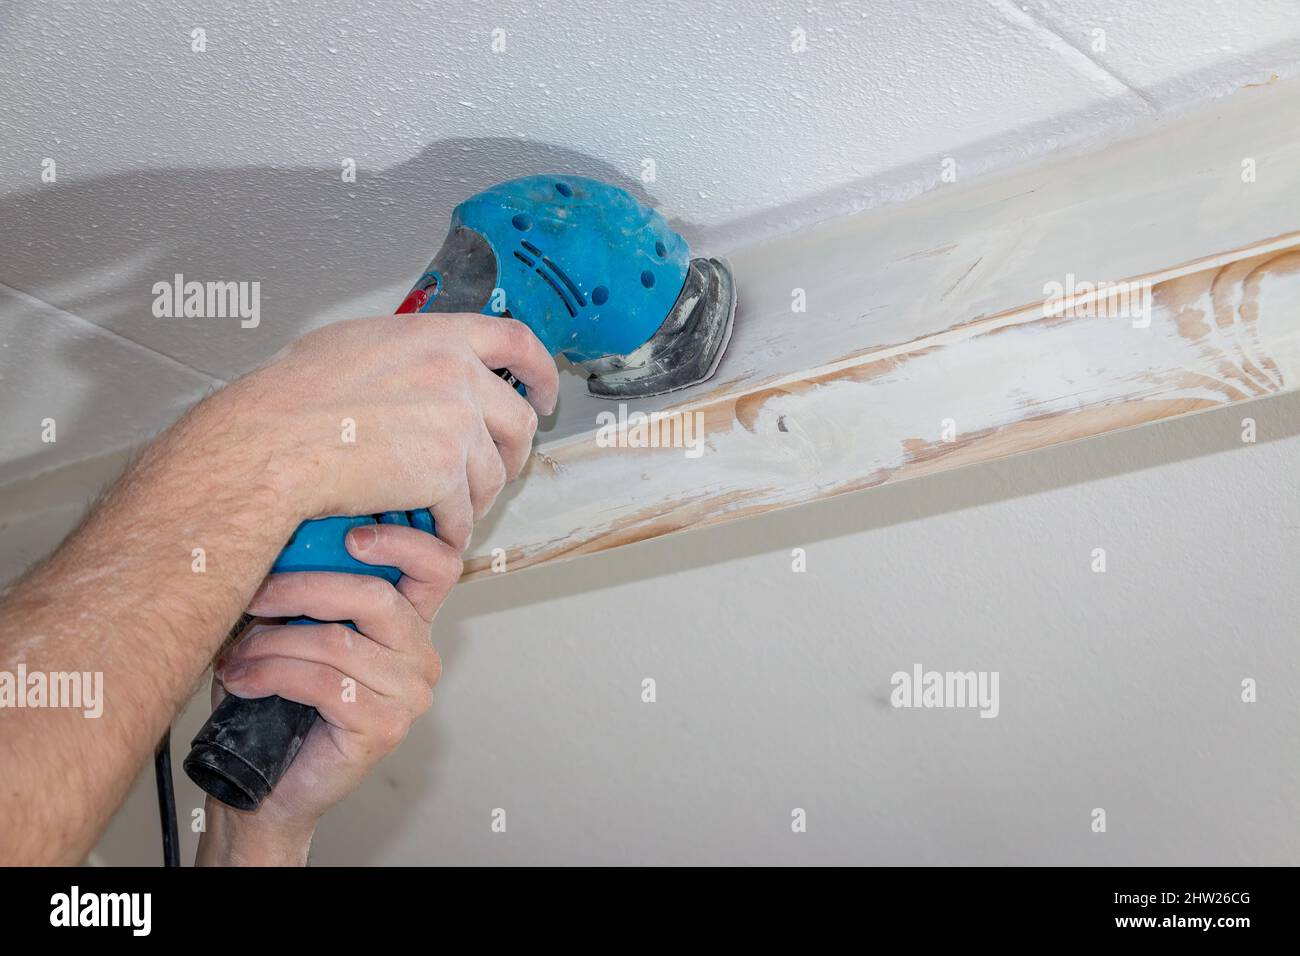 Sand the wooden ceiling beams with a sander and then paint them in a nice color, the Netherlands Stock Photo